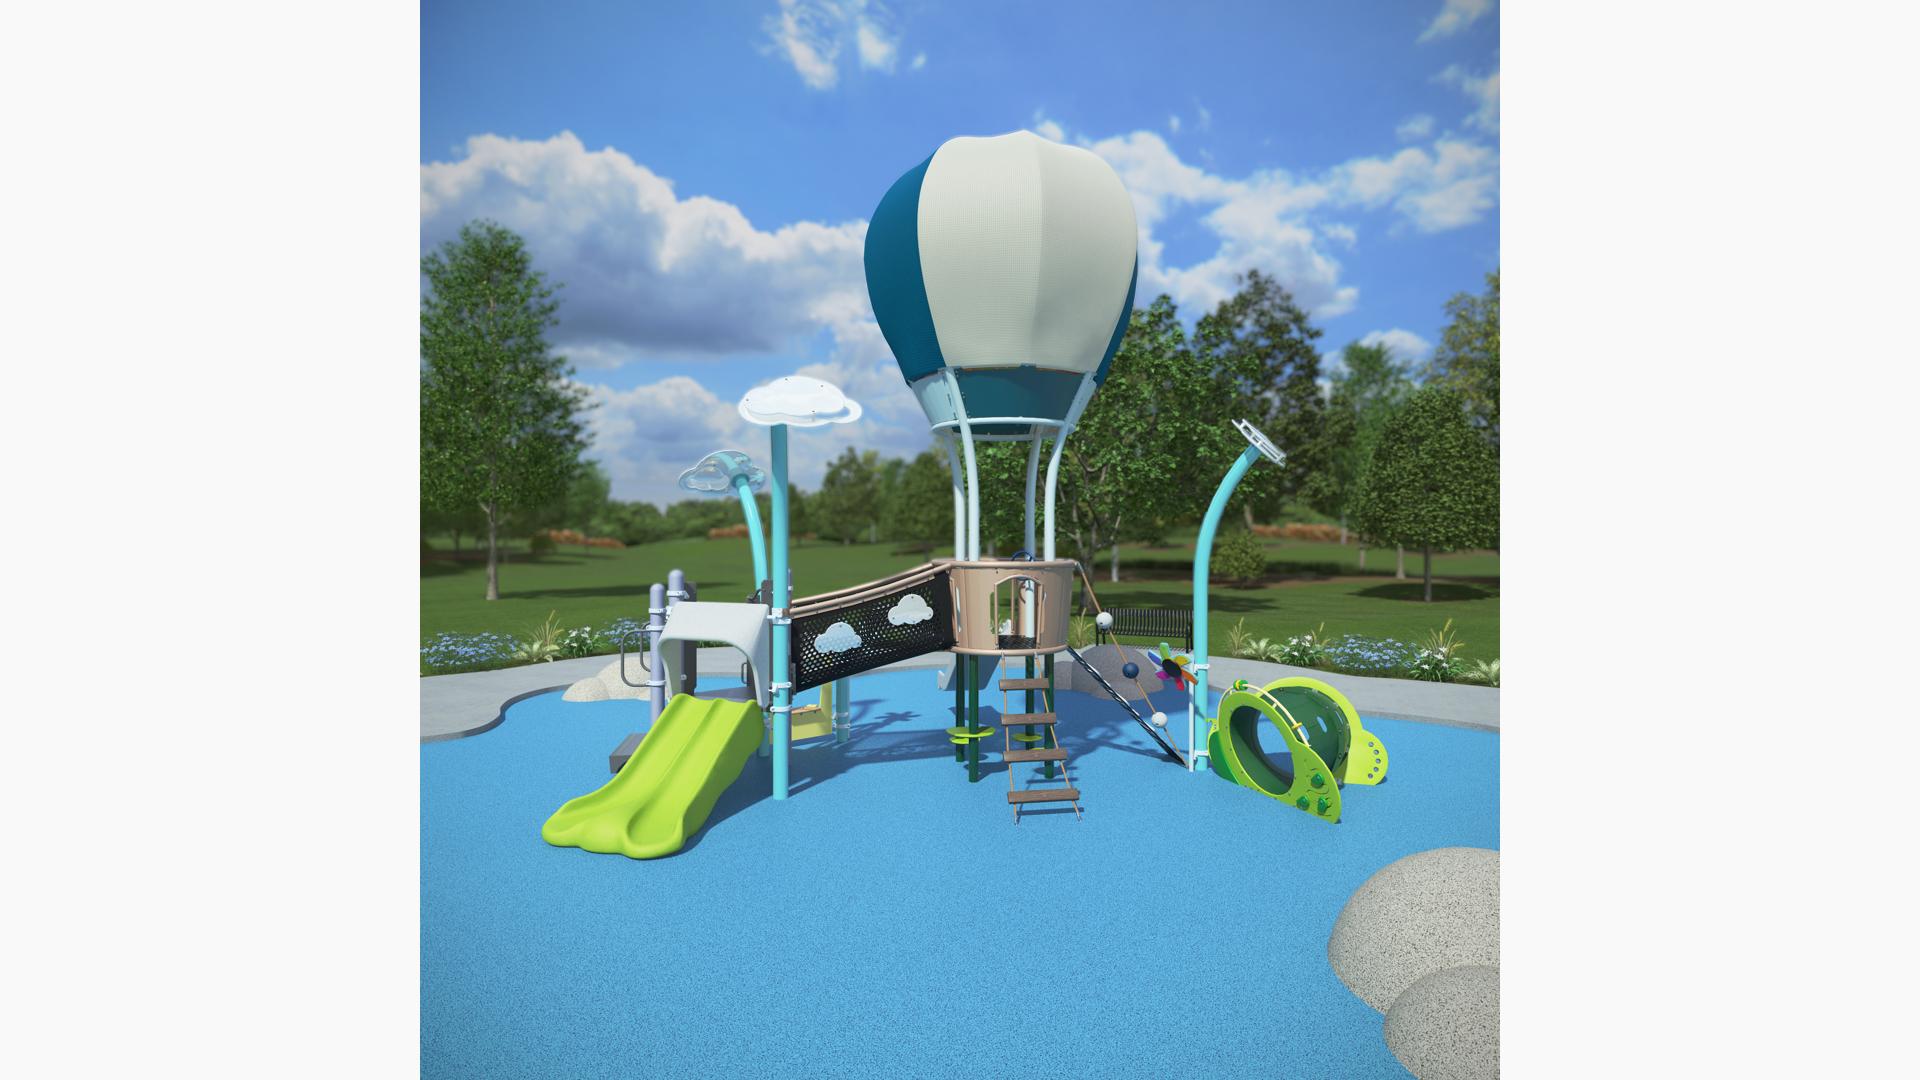 Animated render of a hot air balloon designed playground structure.